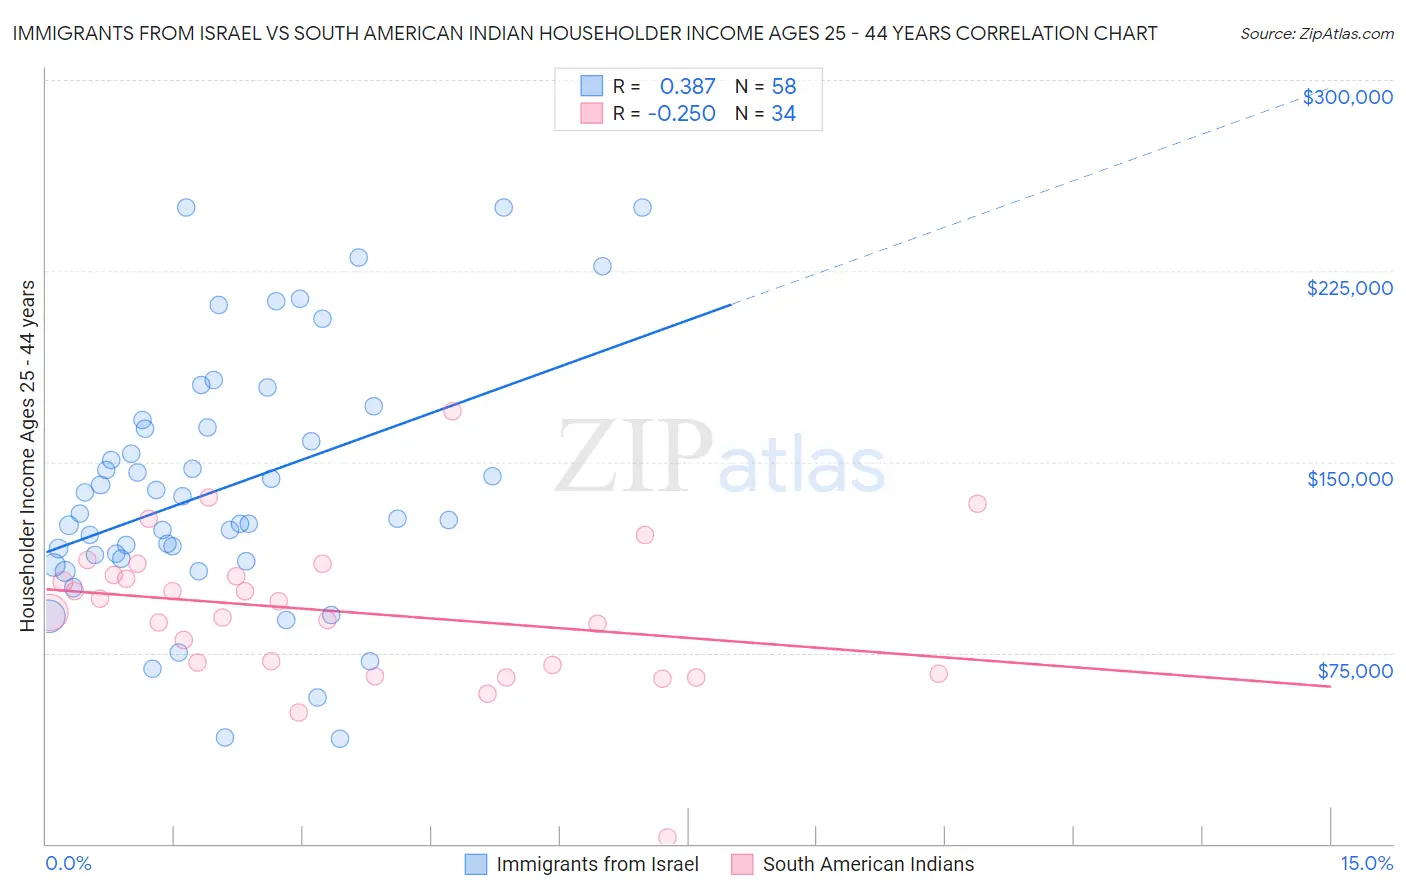 Immigrants from Israel vs South American Indian Householder Income Ages 25 - 44 years